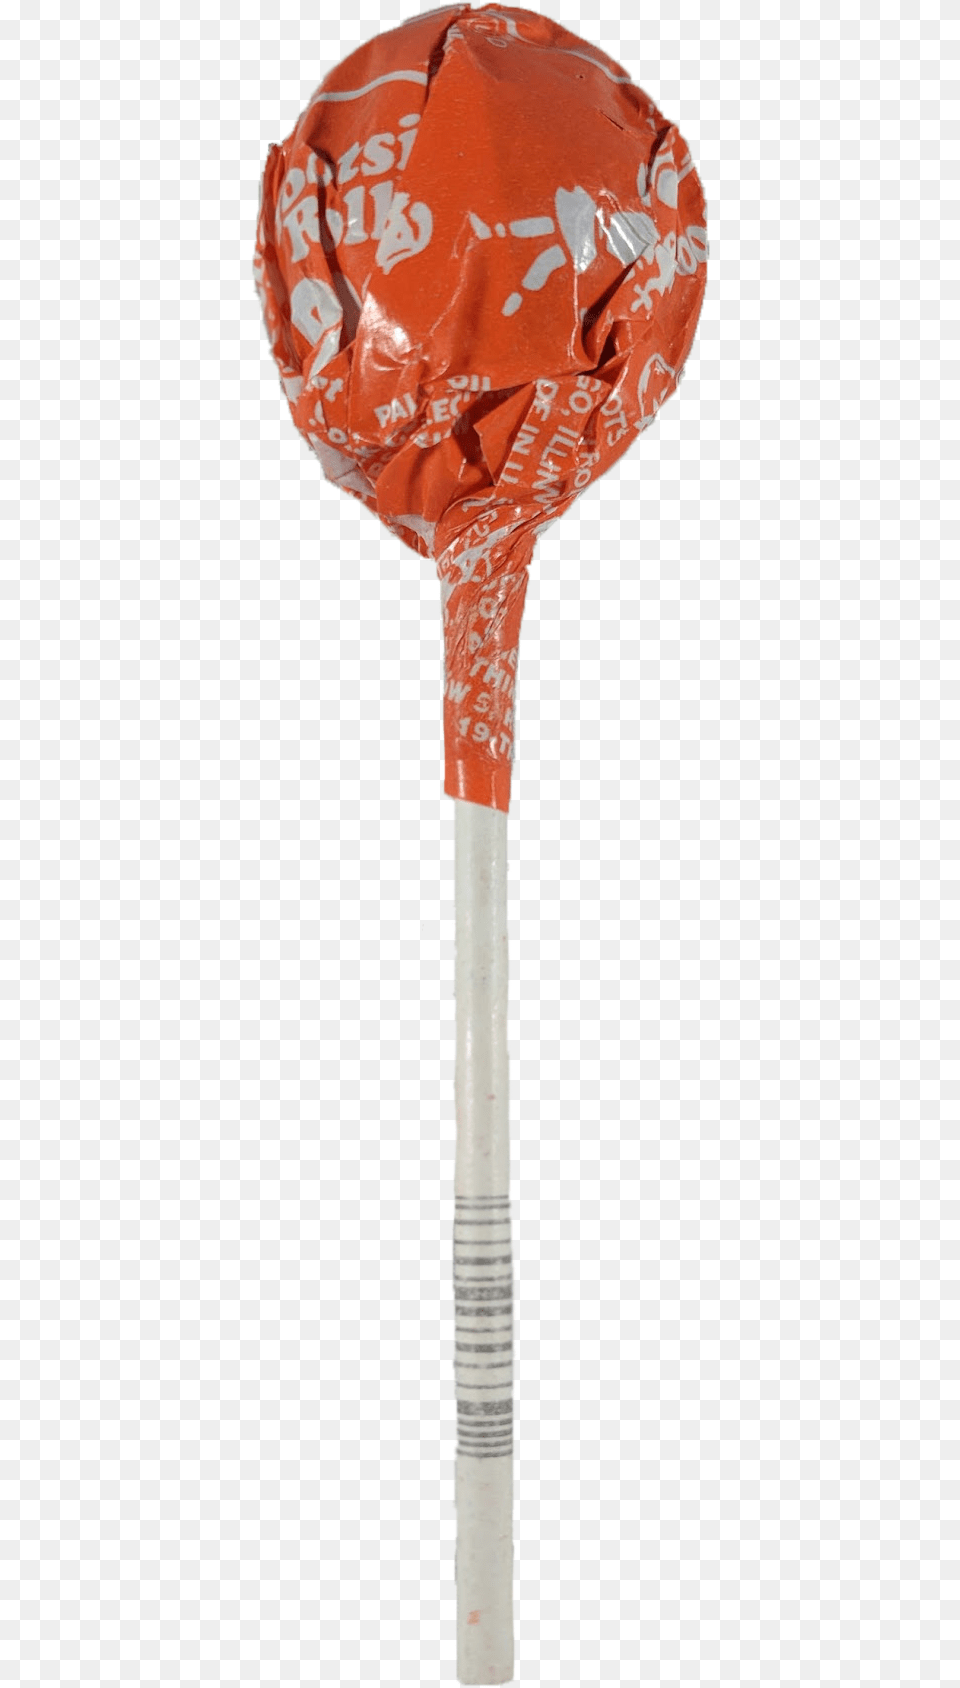 Lace, Candy, Food, Sweets, Lollipop Png Image